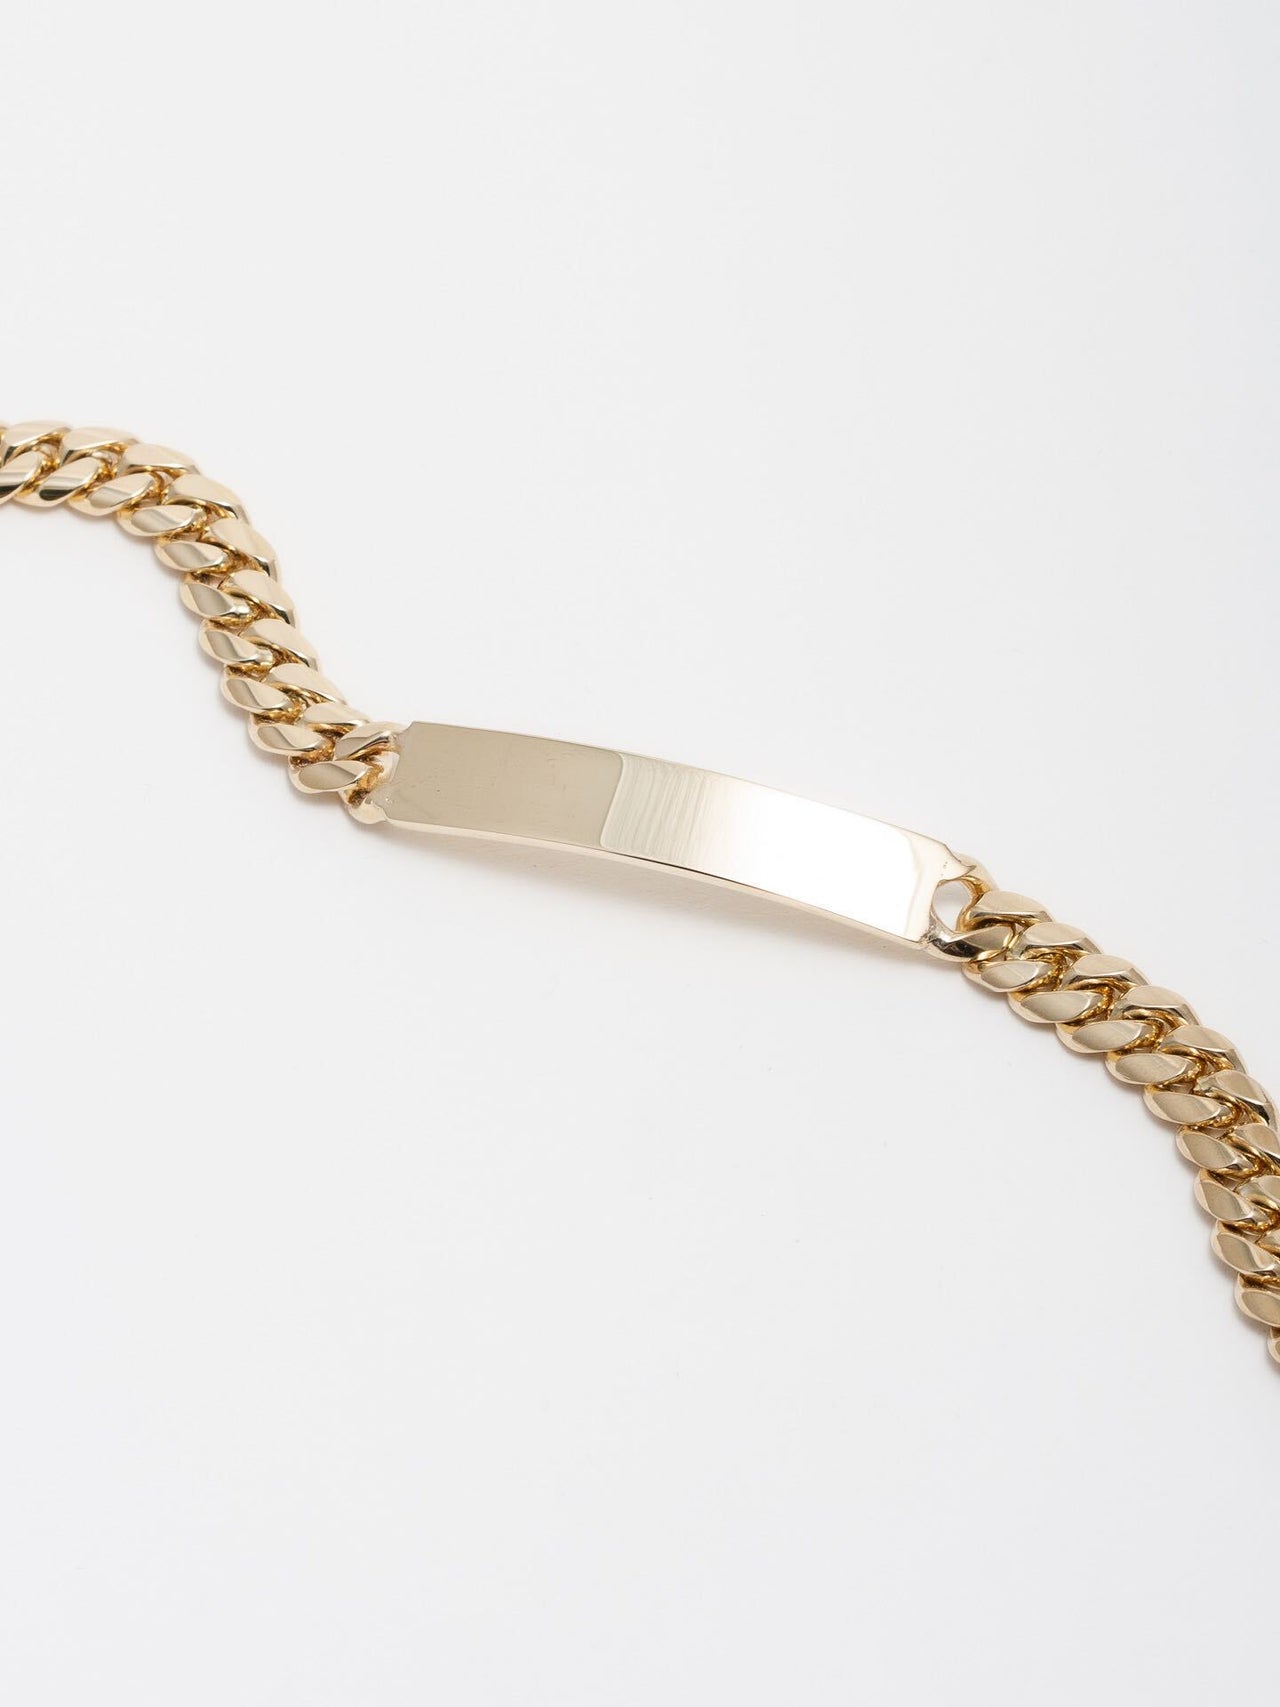 14kt Yellow Gold Solid XL Cuban Chain ID Bracelet pictured laid out length wise on light grey background.